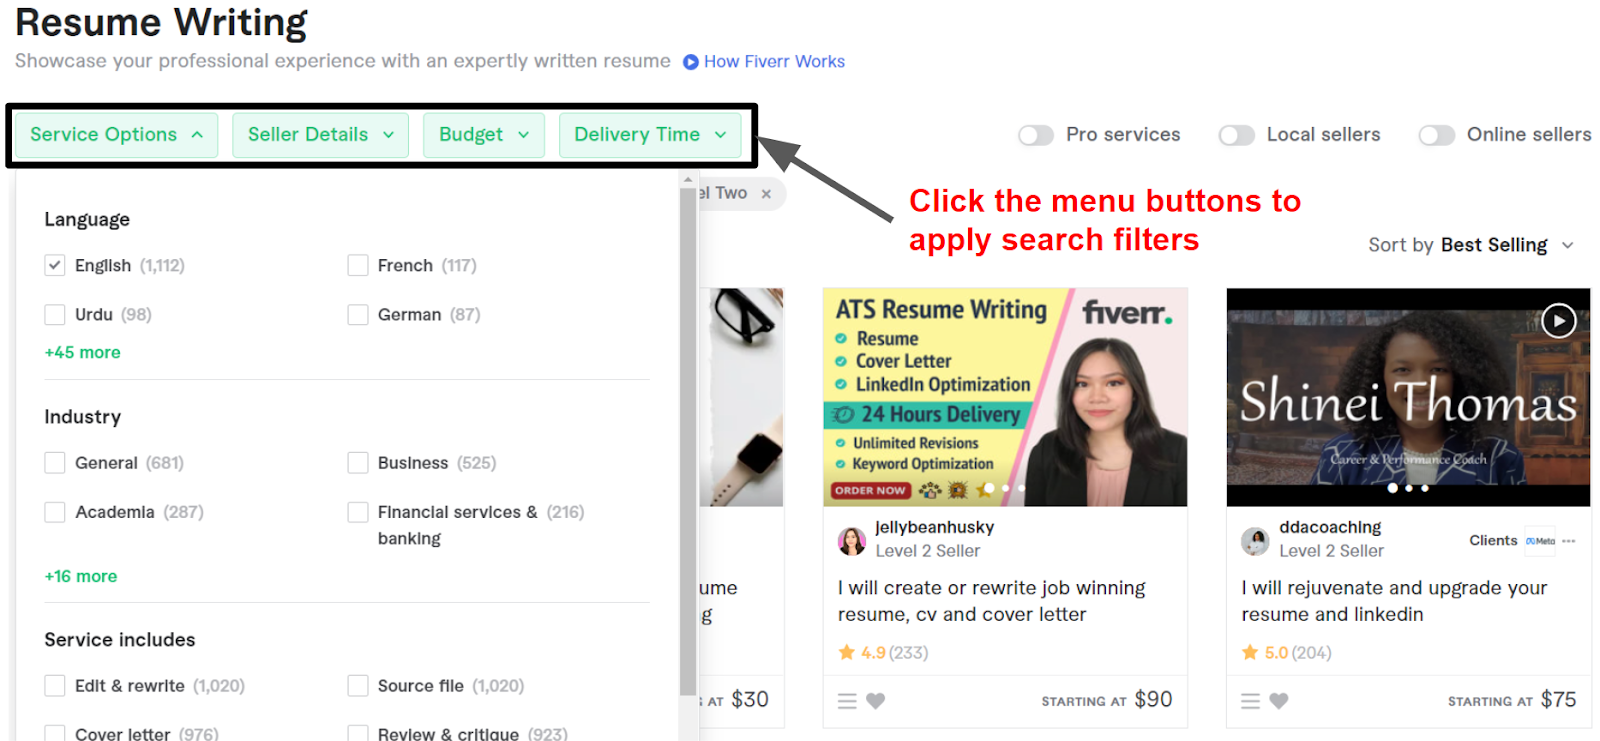 applying search filters to Fiverr's search engine